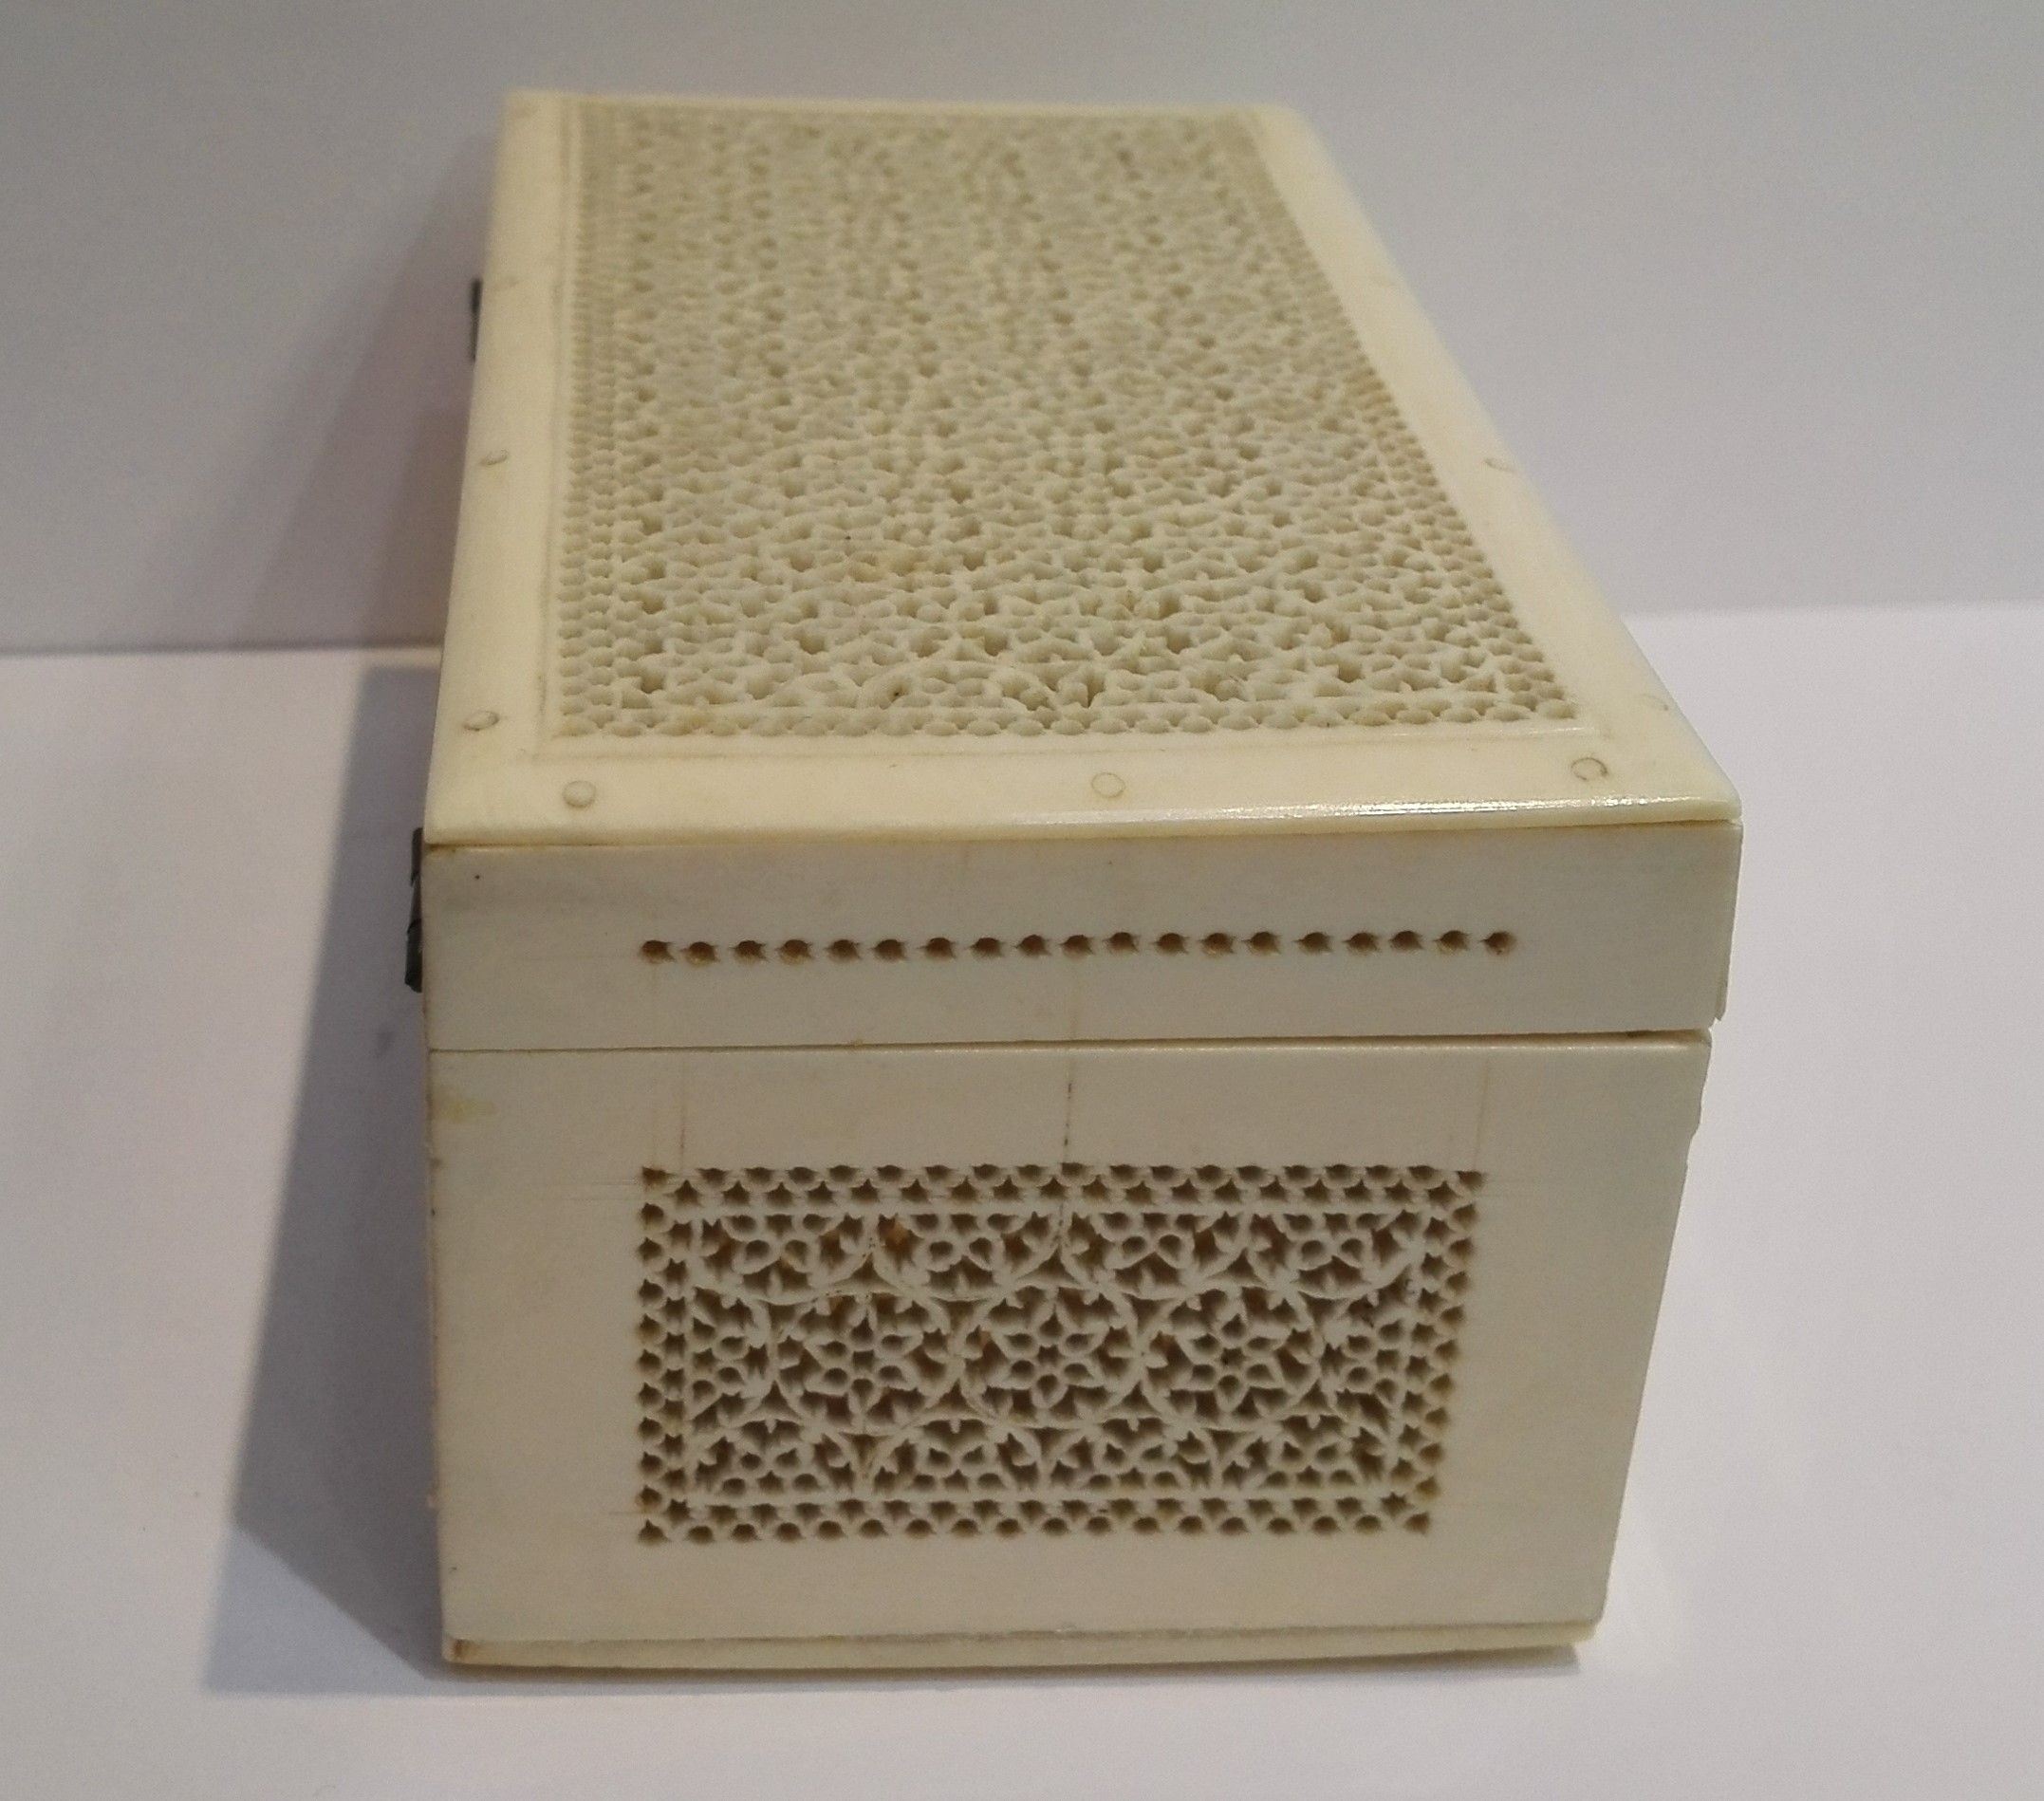 A C19th Indian ivory fine elaborate pierced casket/box with intricate openwork detailing, L11.5cm - Image 5 of 6